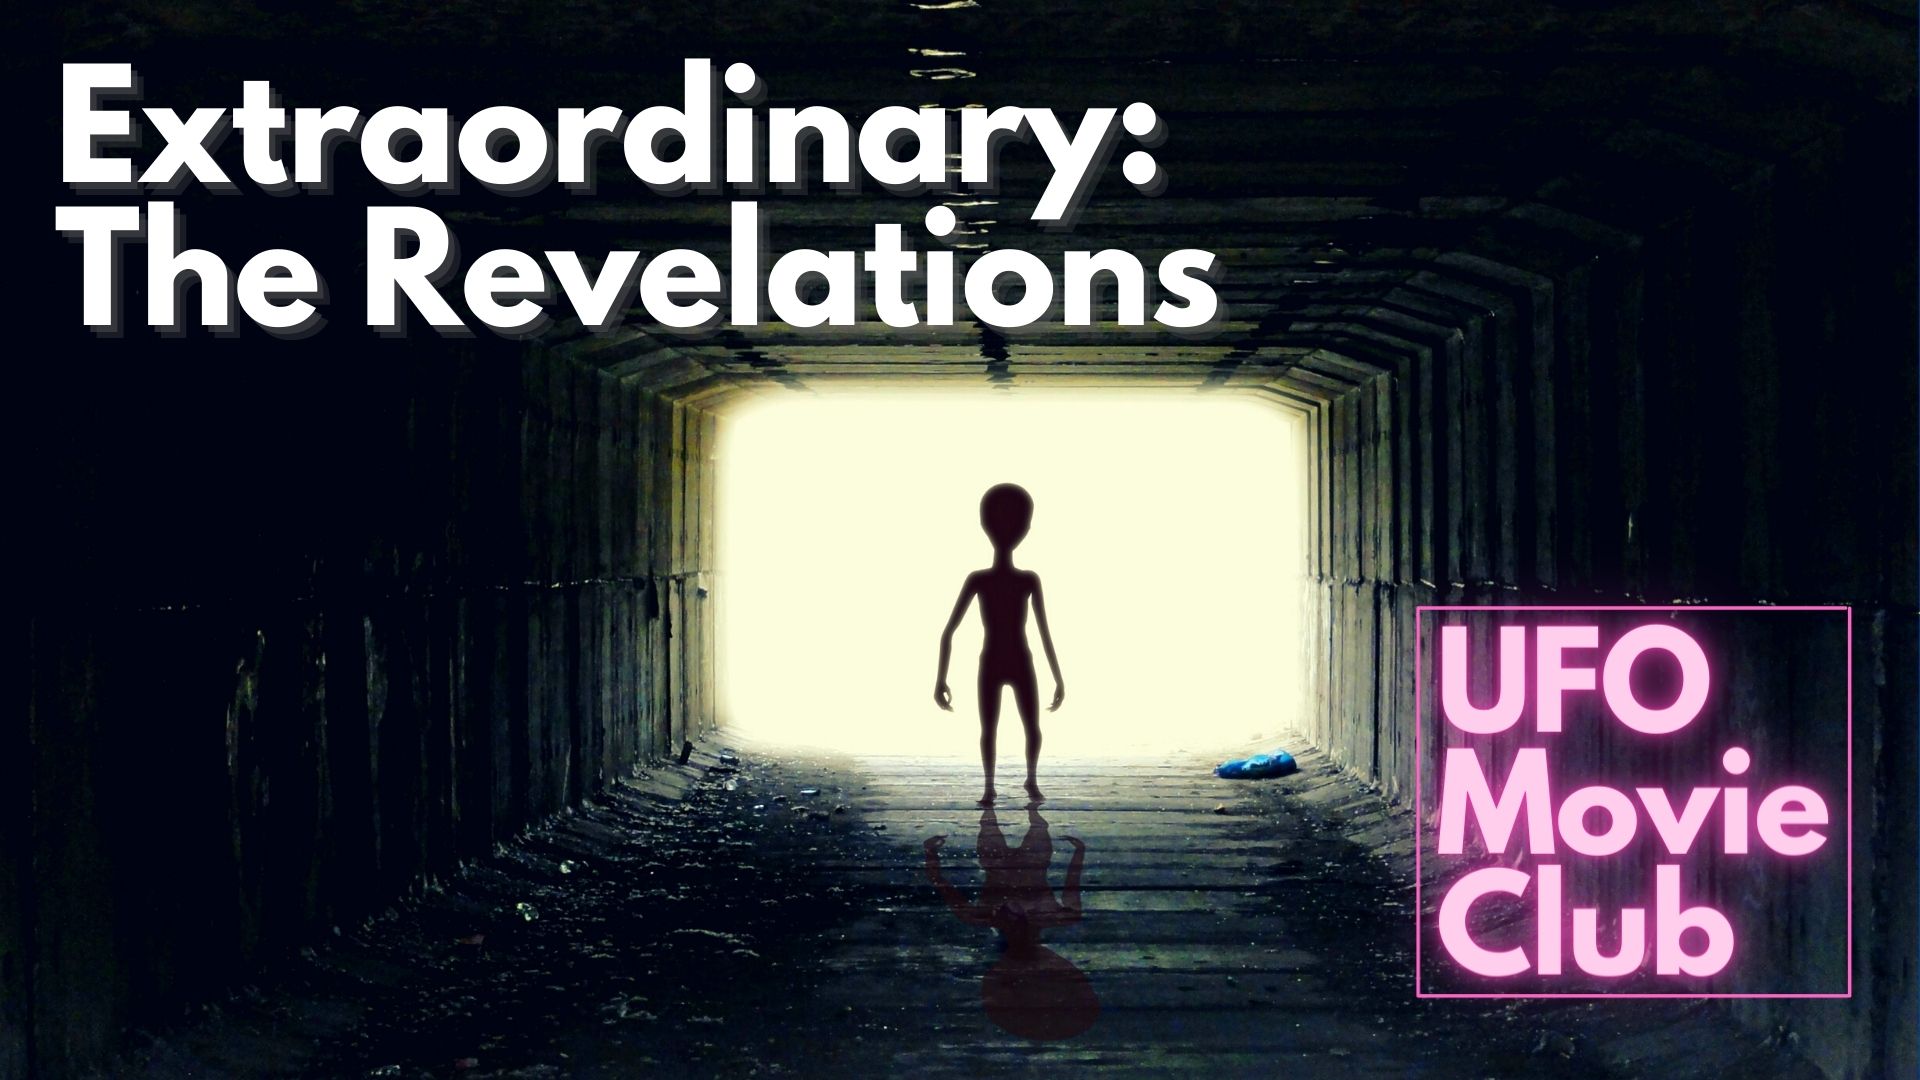 Extraordinary The Revelations Ufo Movie Club Video Review Victor Stiff Reviews